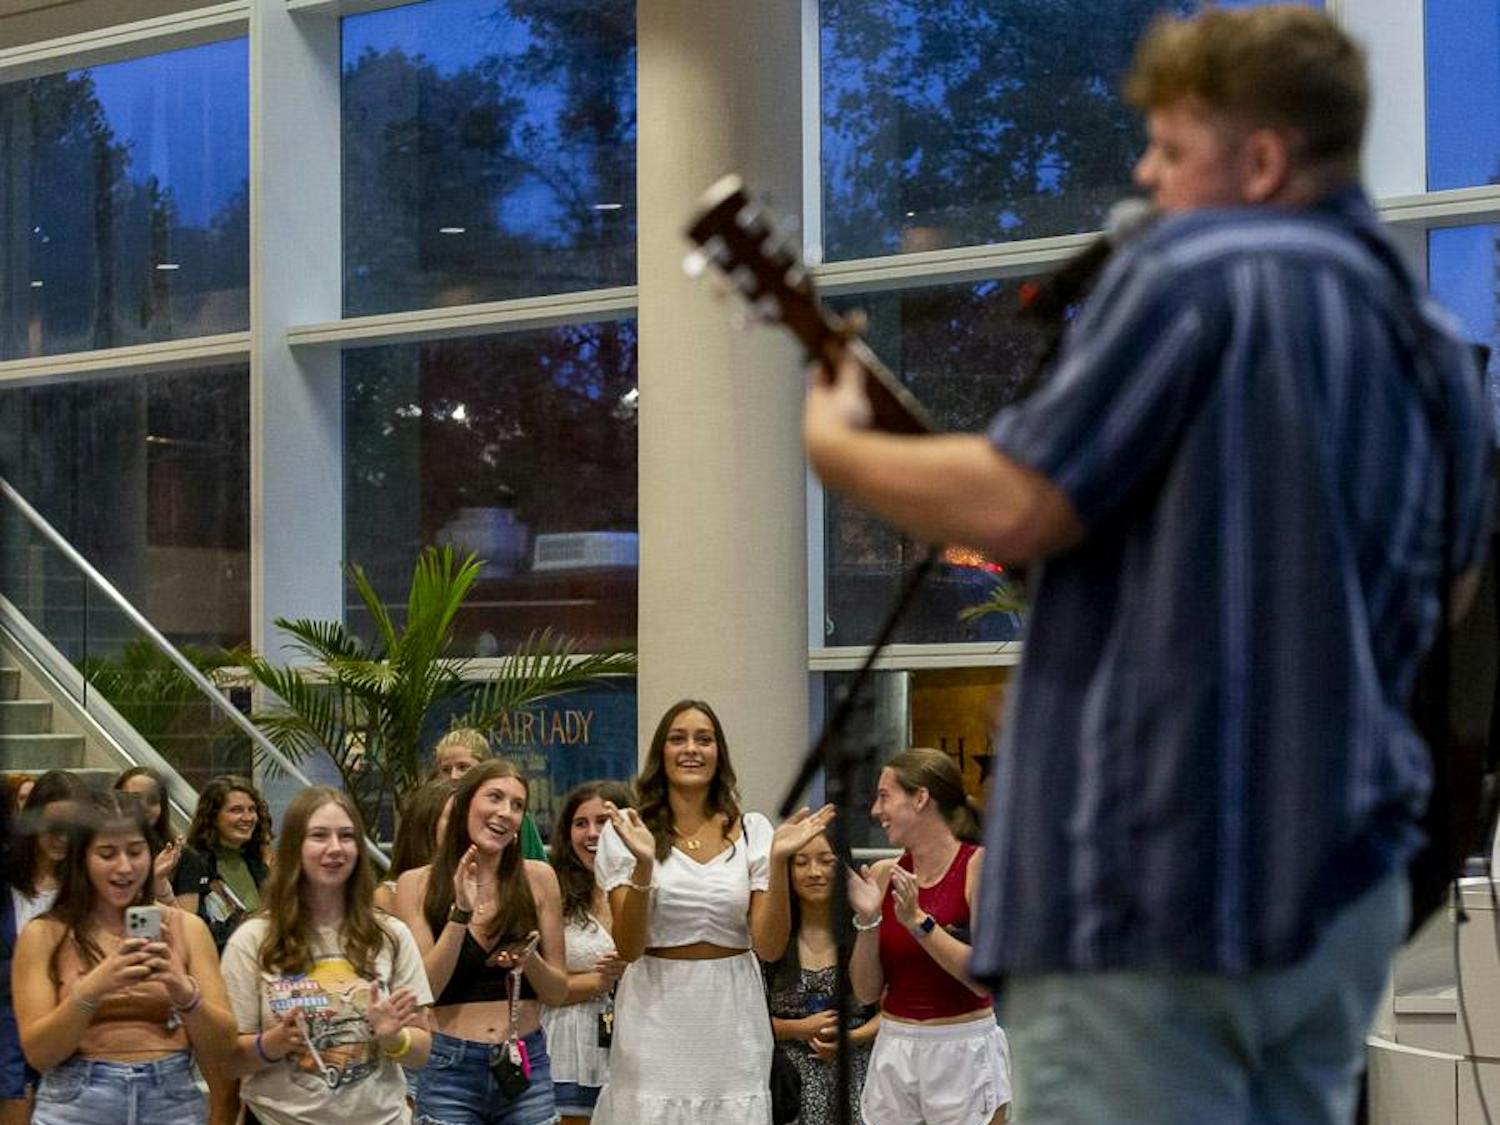 Students clap during Will Cullen's headlining performance at the Koger Center on Aug. 27, 2023. Cullen performed a mashup of popular songs and played some of his original tracks.